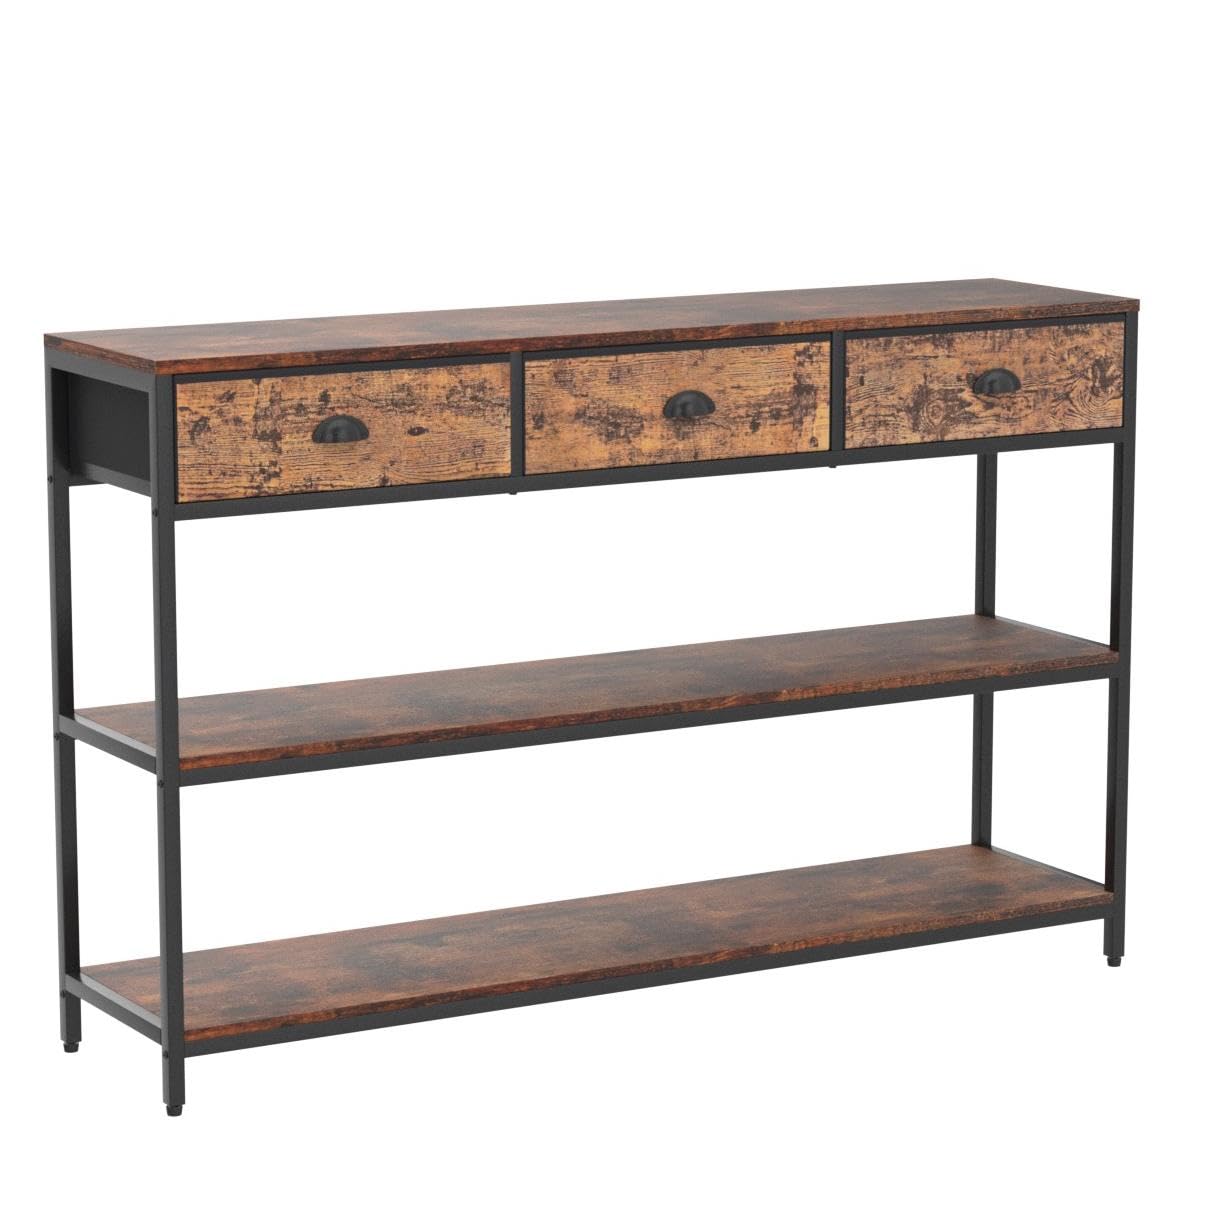 Furologee Long 47" Console Sofa Table with 3 Drawers, Entryway Table with 3-Tier Storage Shelves, Industrial Display Shelf for Entry Way, Hallway, Couch, Living Room, Kitchen, Foyer, Rustic Brown